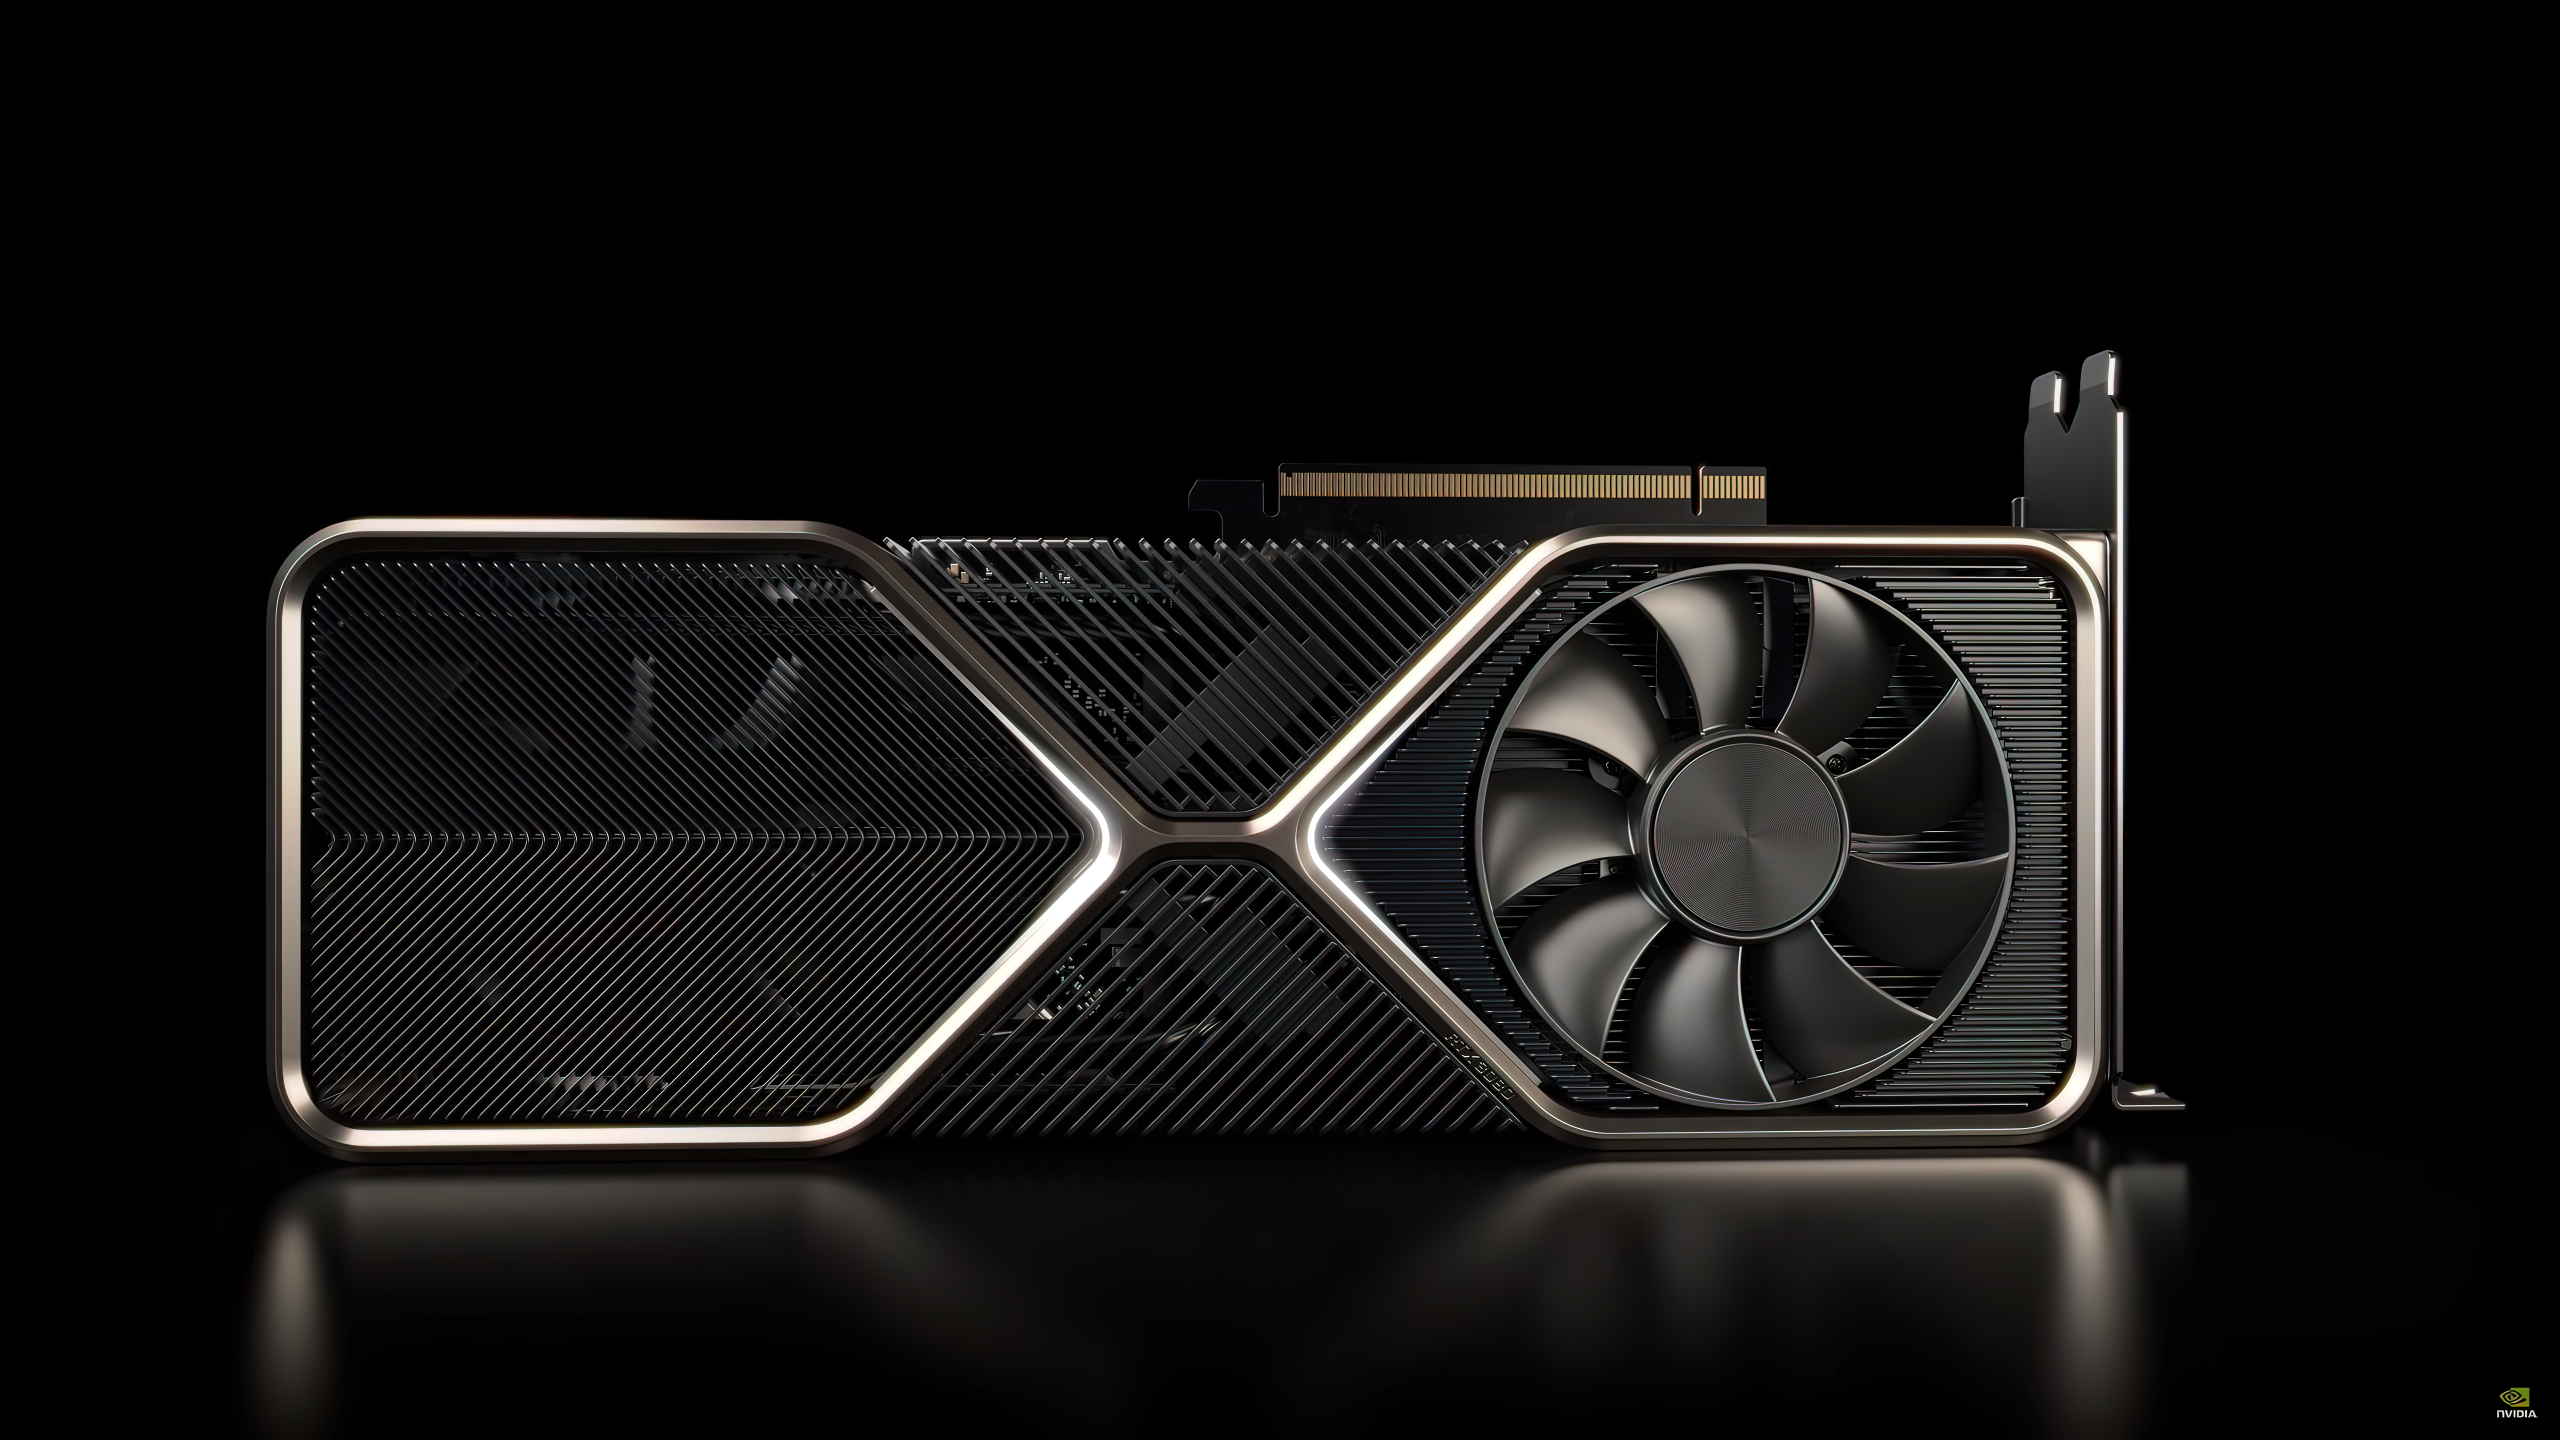 GeForce RTX 4070 with 12GB GDDR6X memory and 200W TDP goes on sale for $599